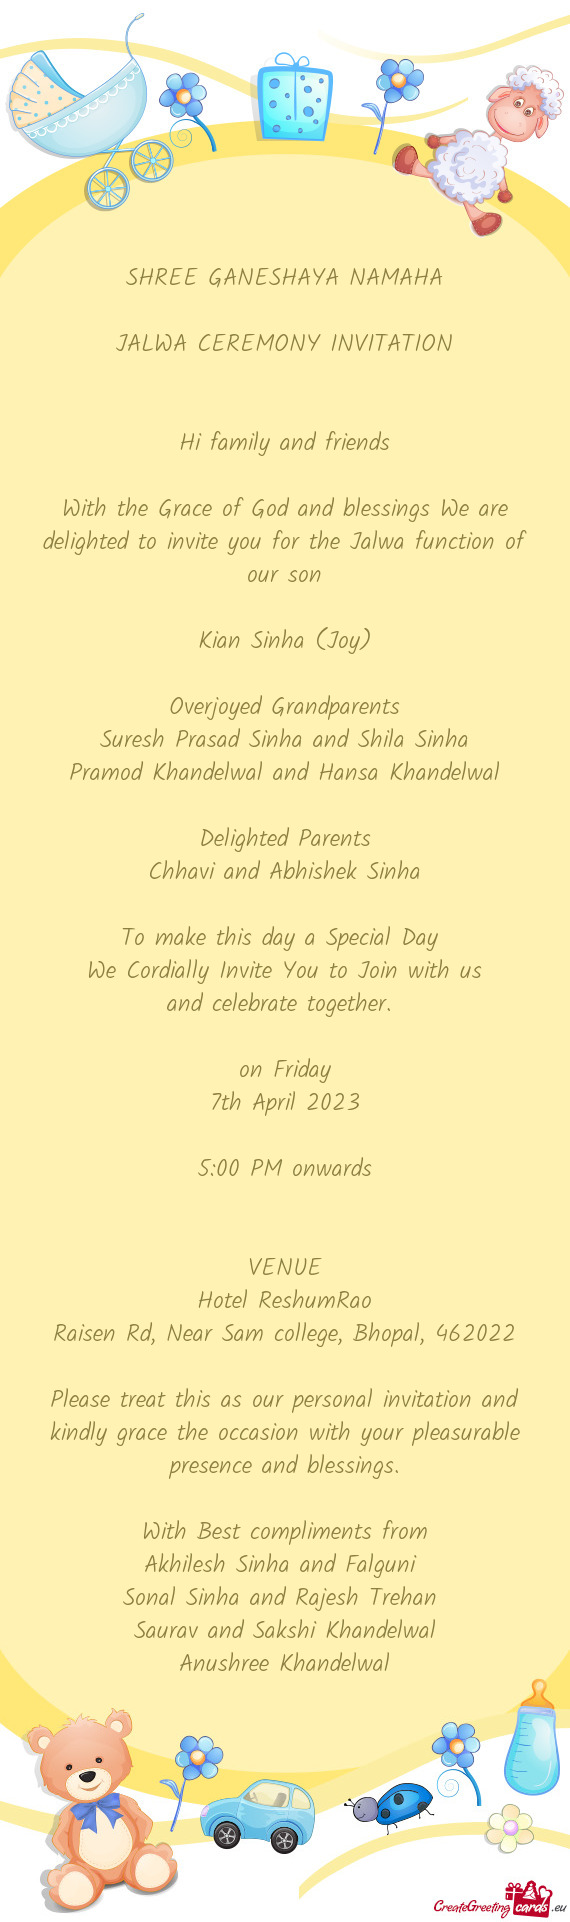 With the Grace of God and blessings We are delighted to invite you for the Jalwa function of our son